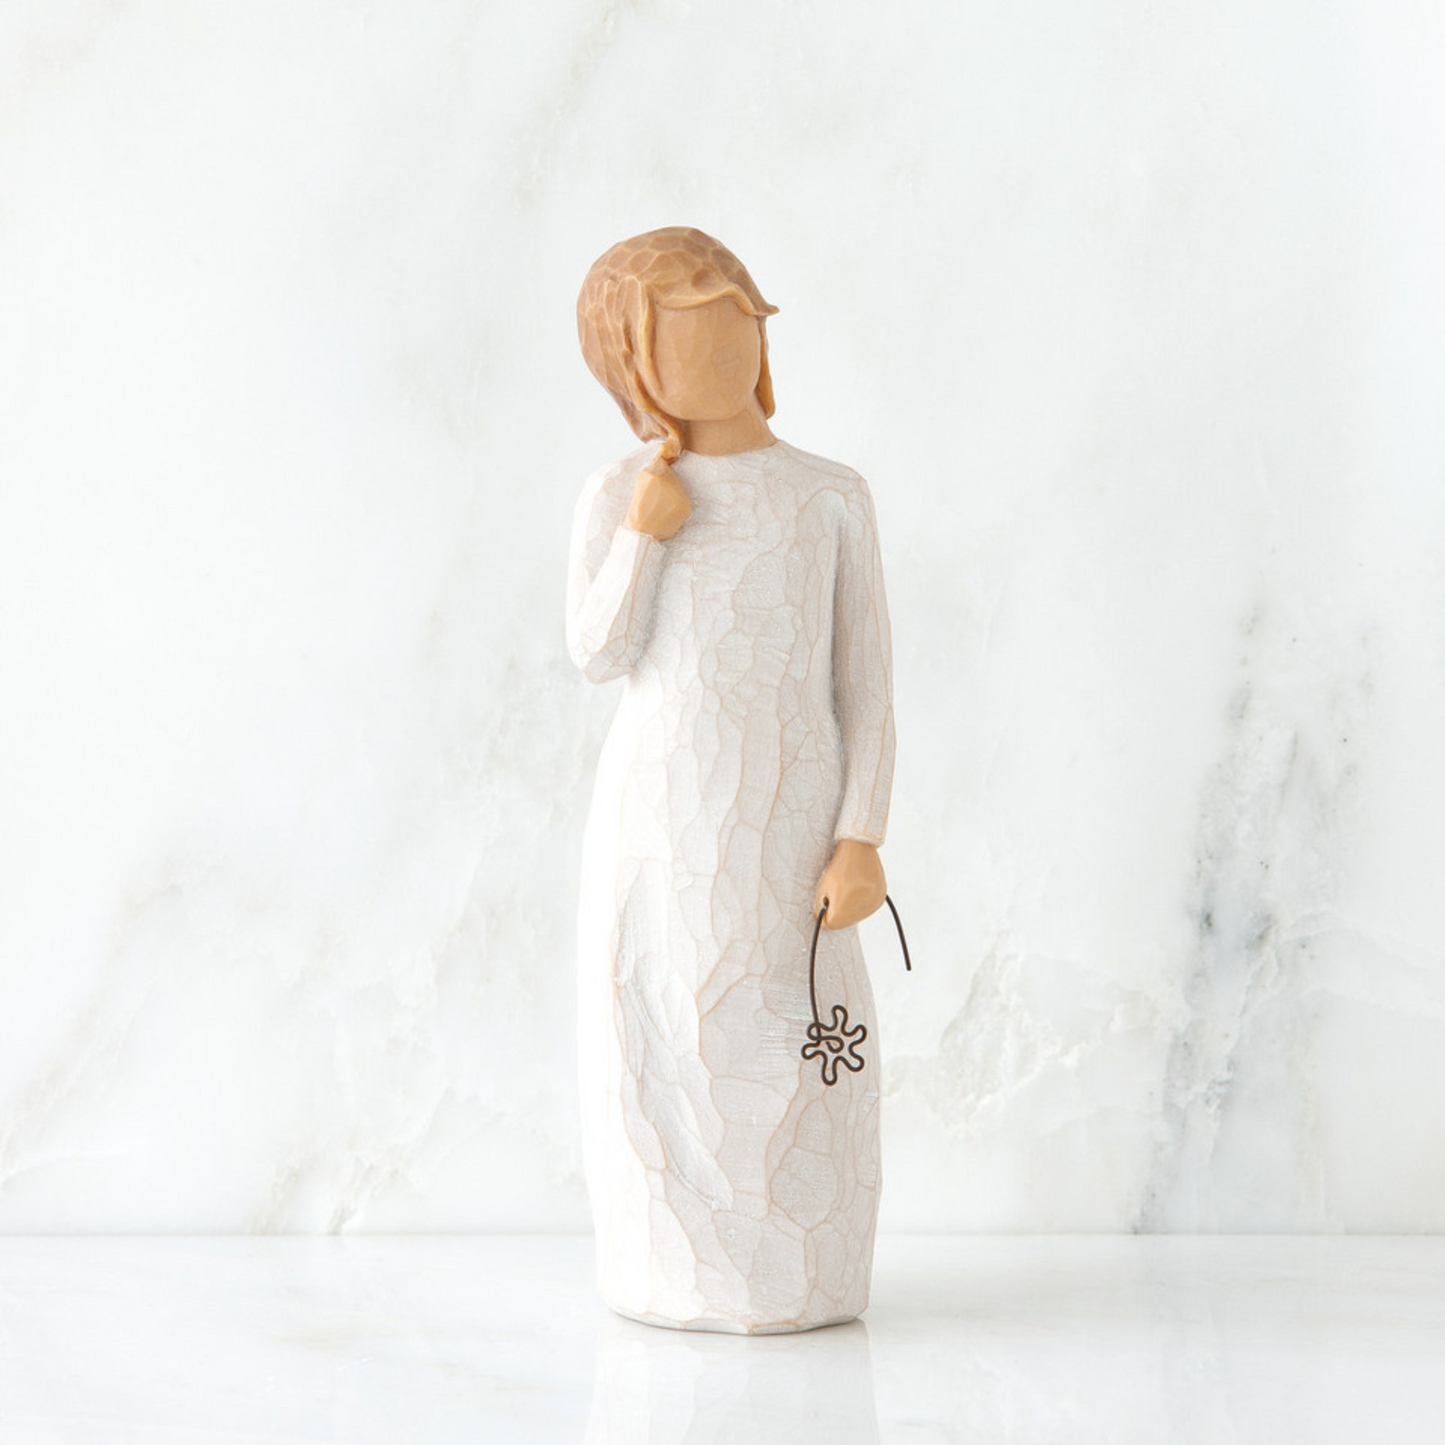 "Remember" Willow Tree Figurine